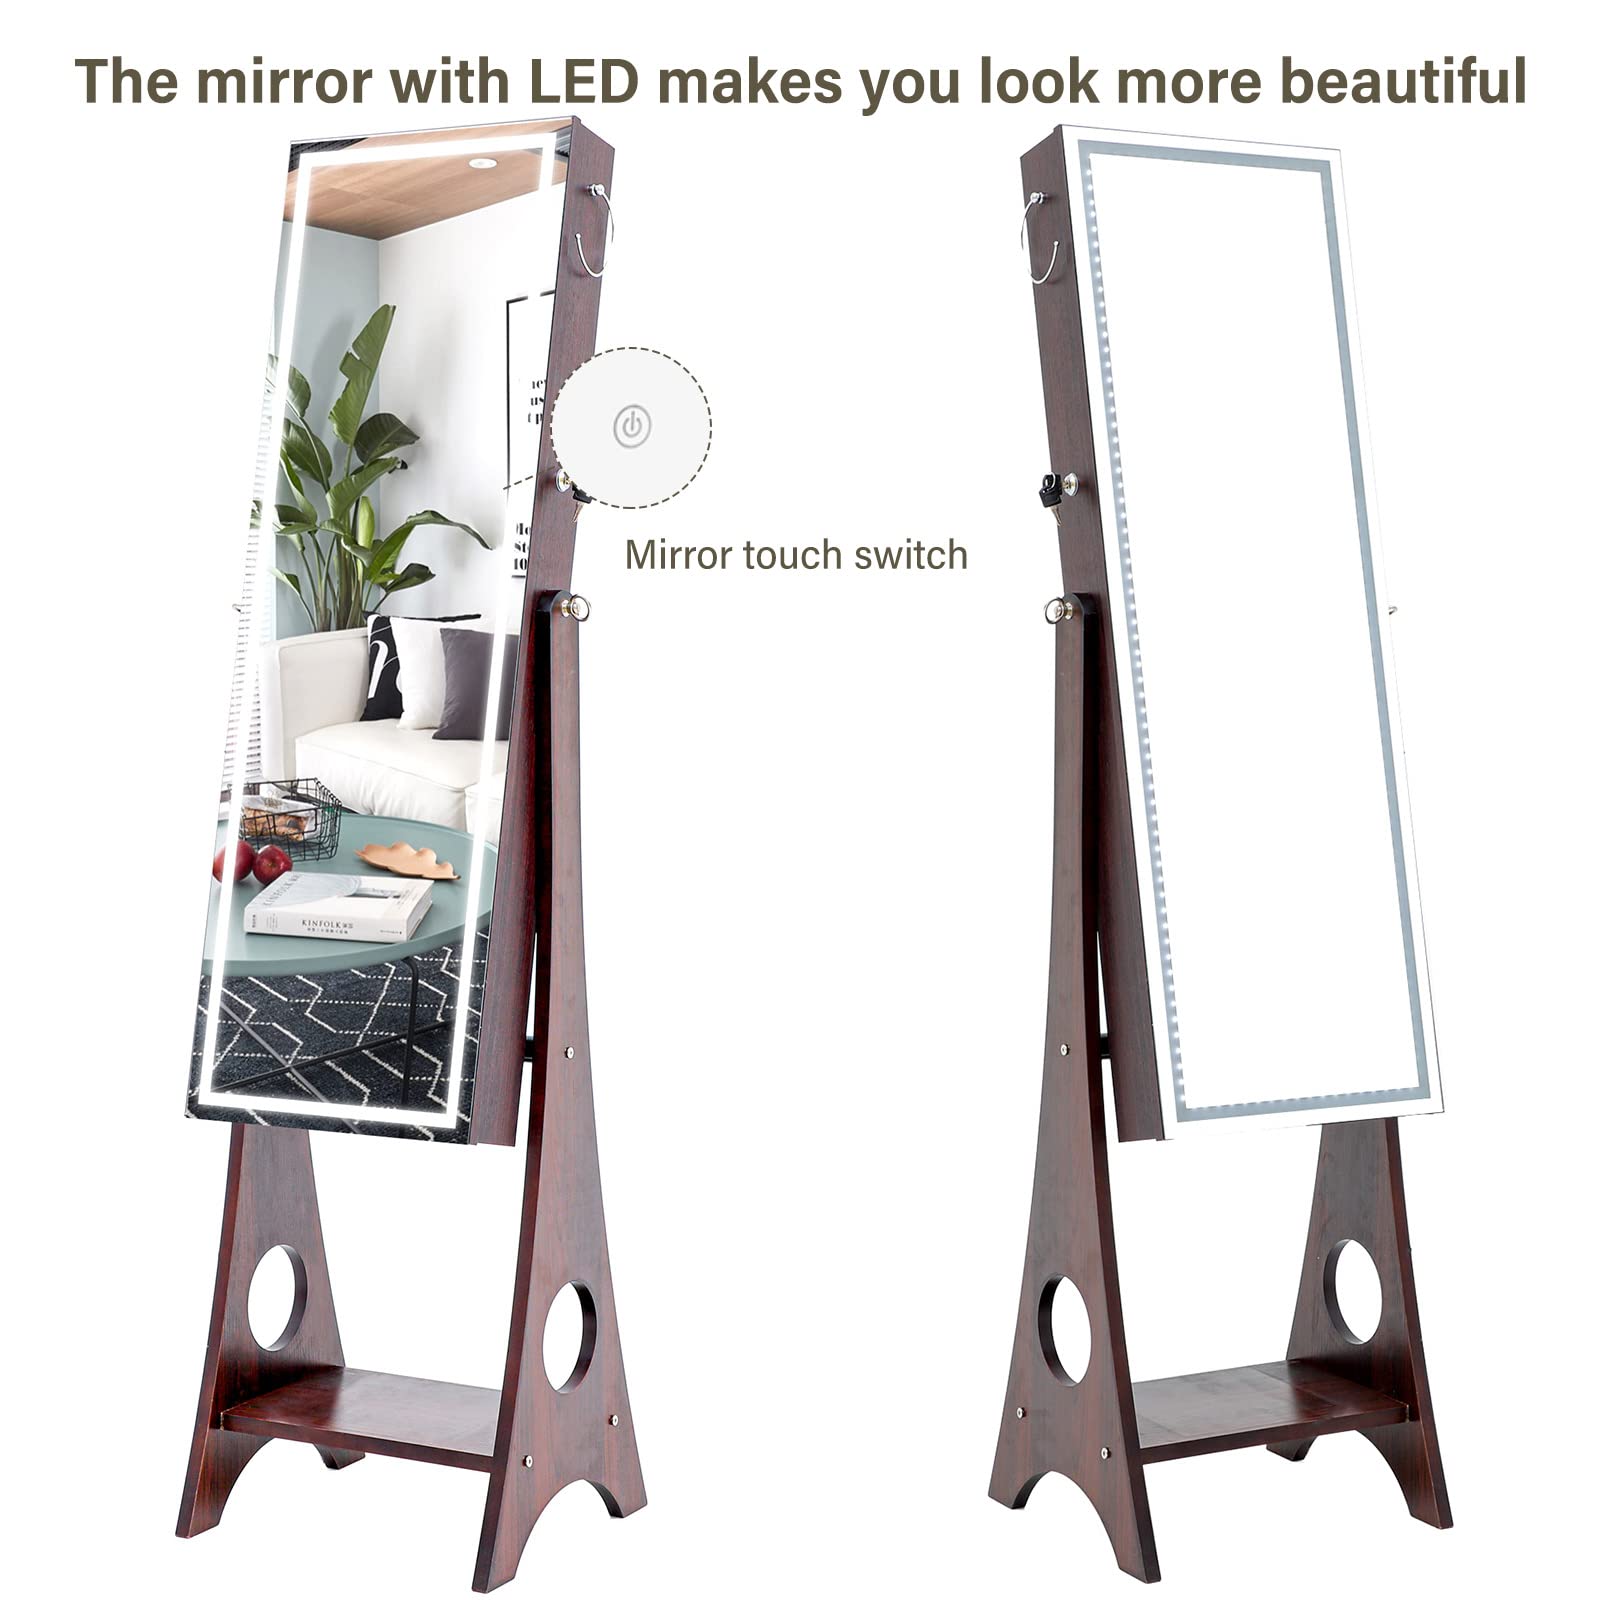 6 Led Jewelry Cabinet Mirror Standing Winered